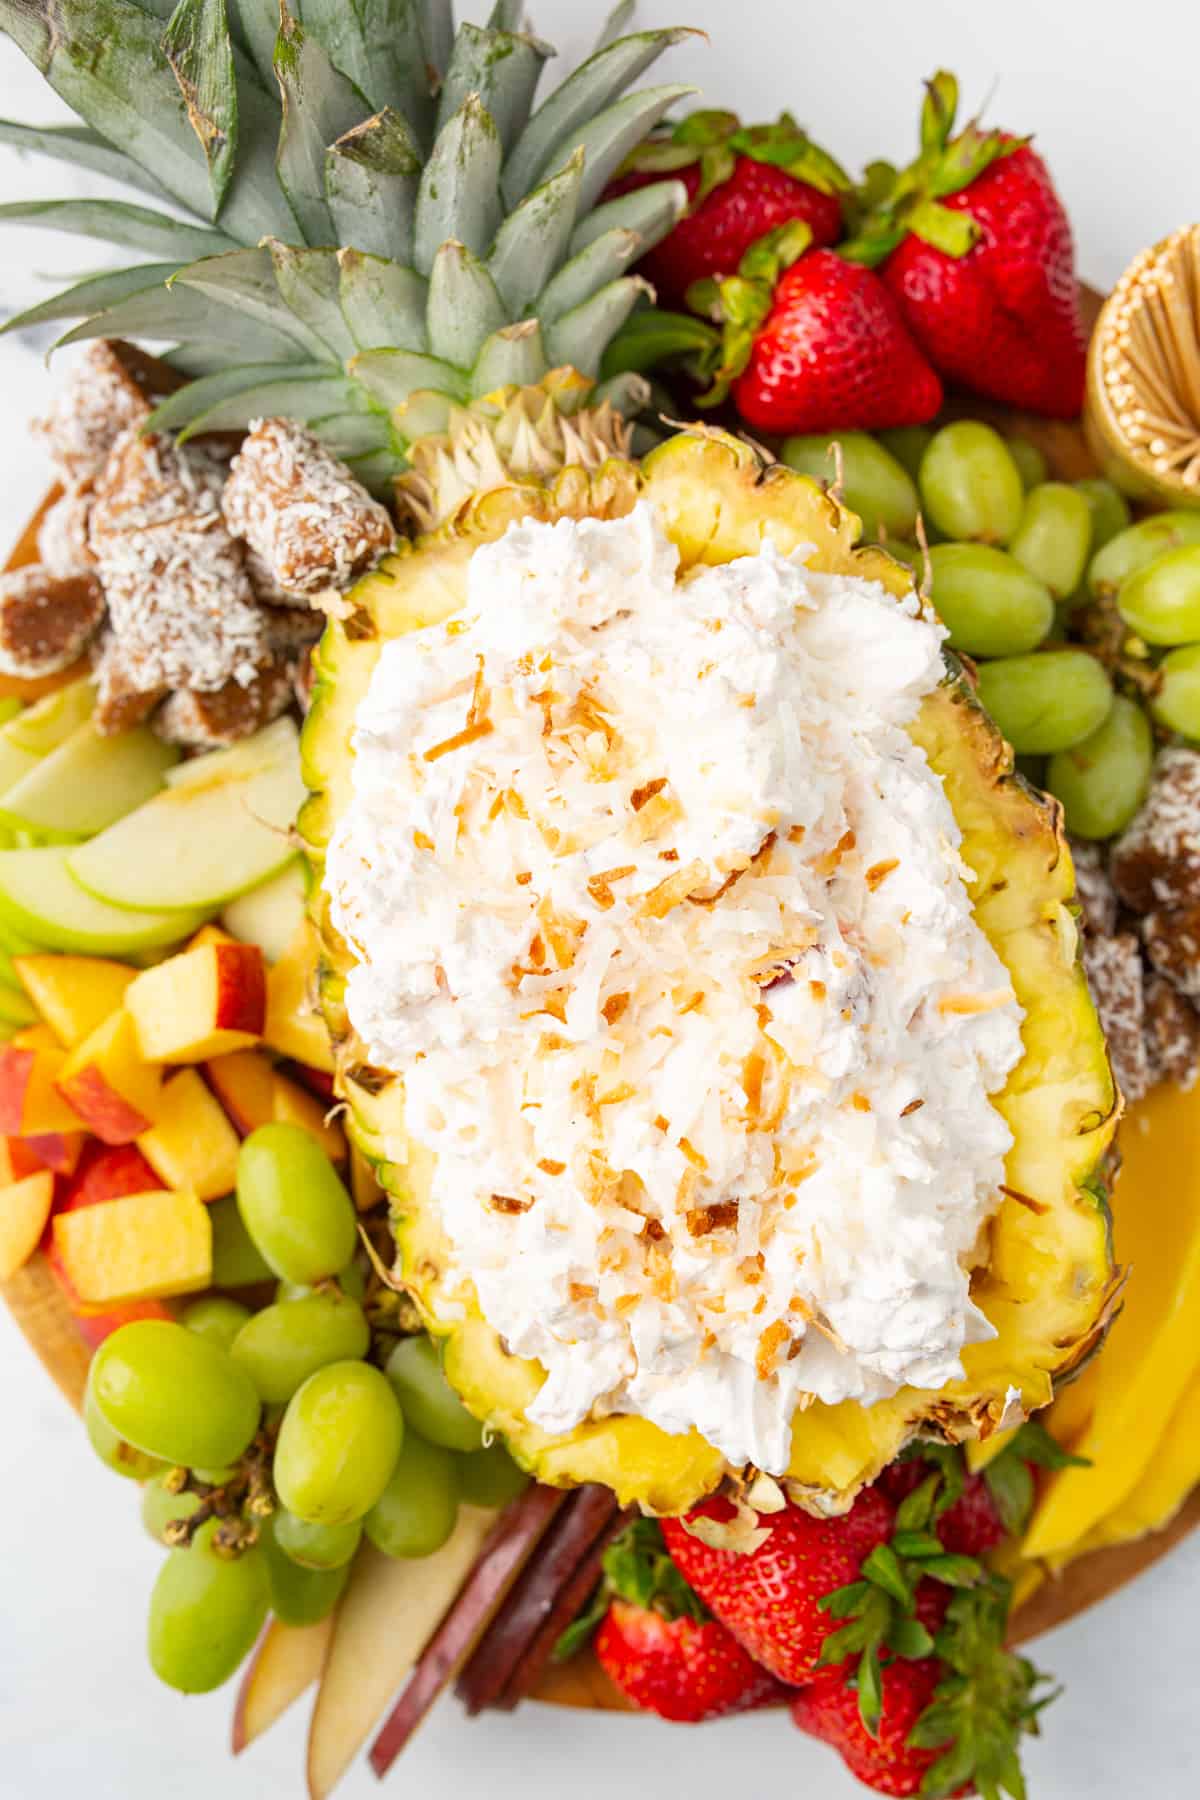 Easy Tropical Fruit Dip - pina colada dip filled in a halved pineapple topped with shredded toasted coconut